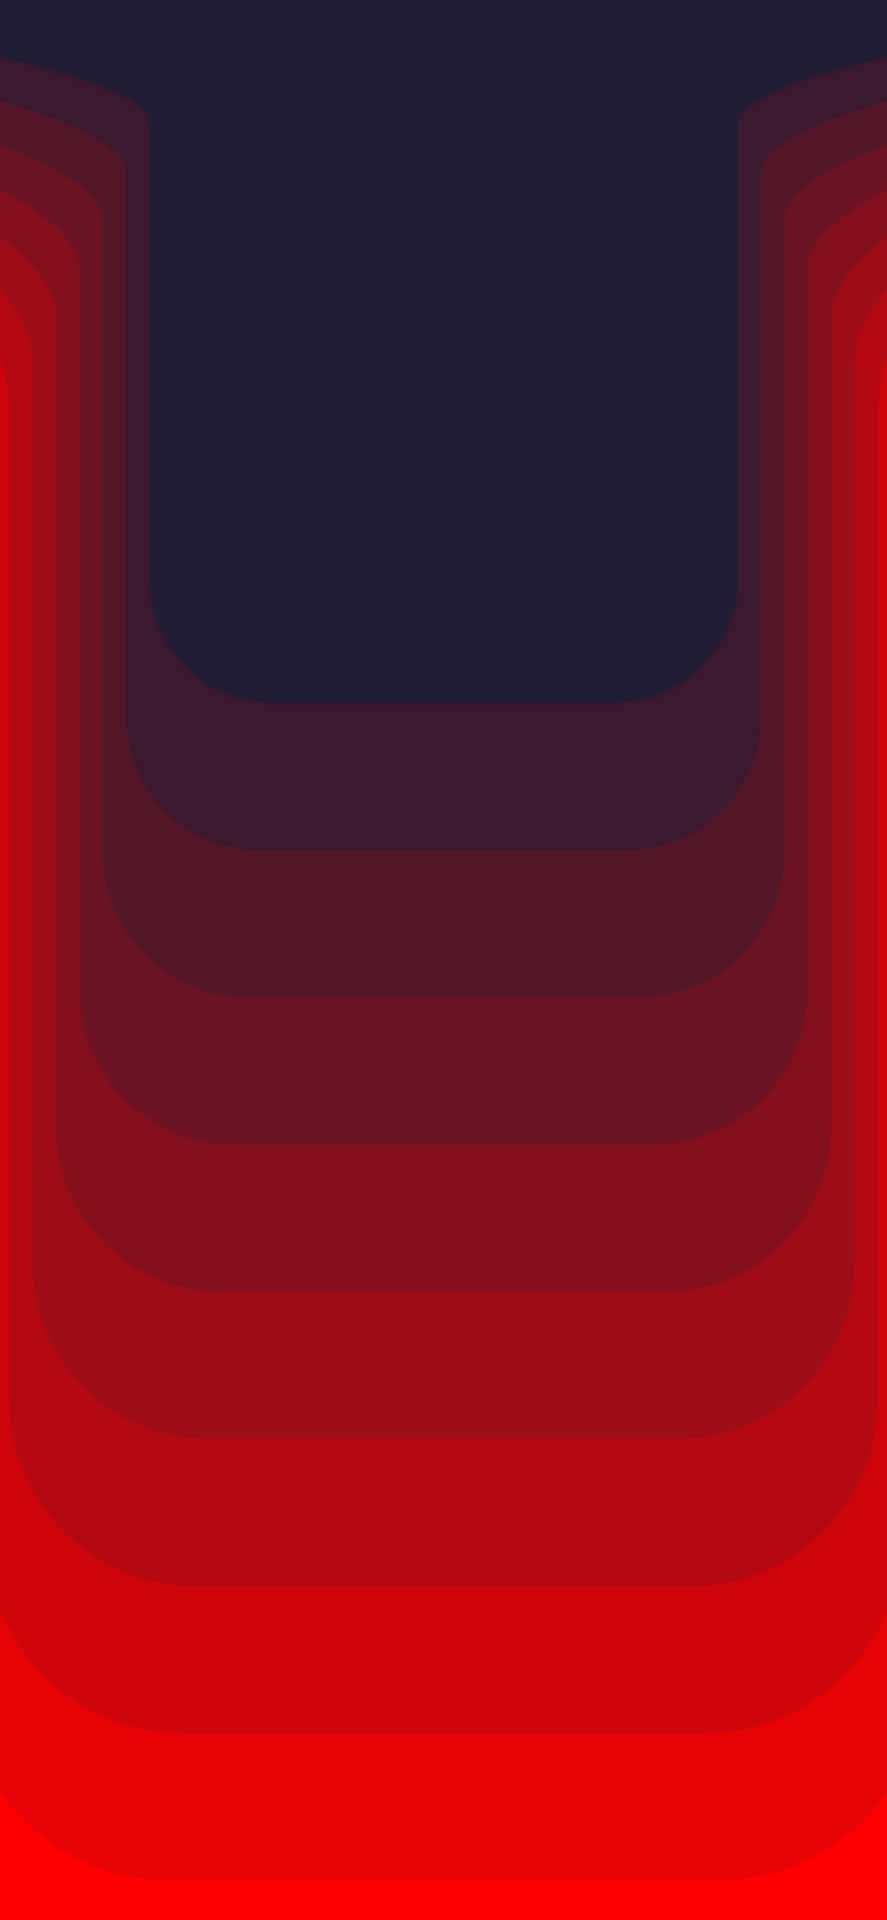 Dark Gradient With Red Layers Wallpaper